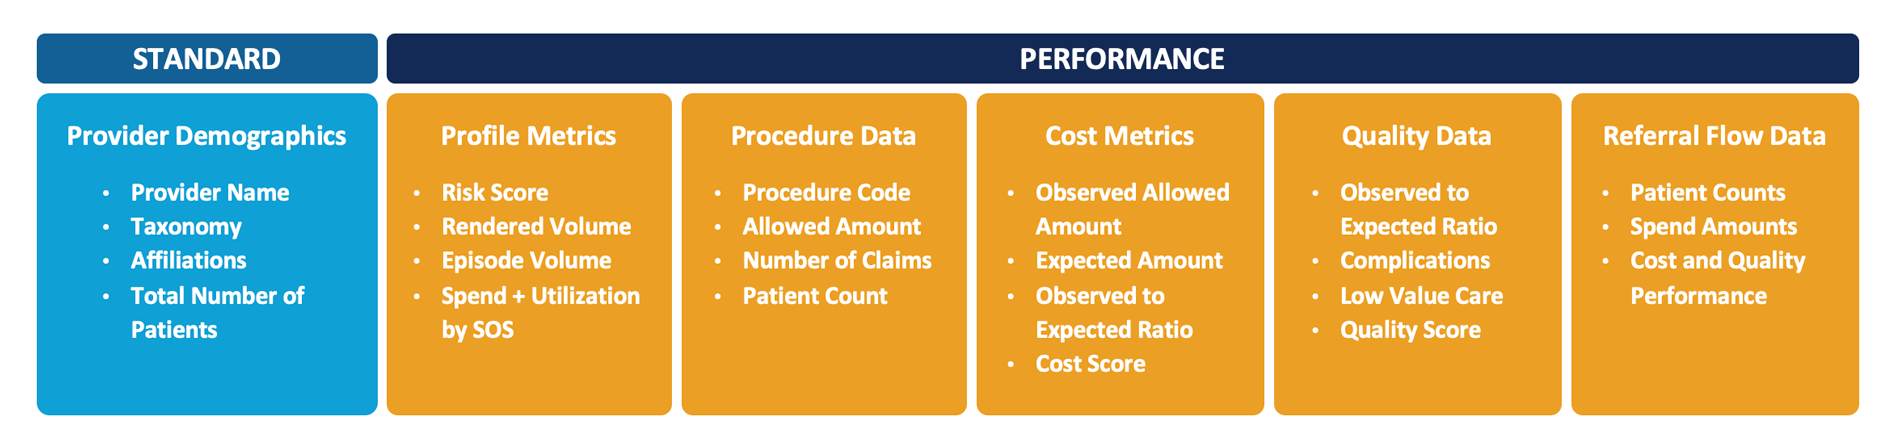 CareJourney Sample Metrics - Standard and Performance tiers